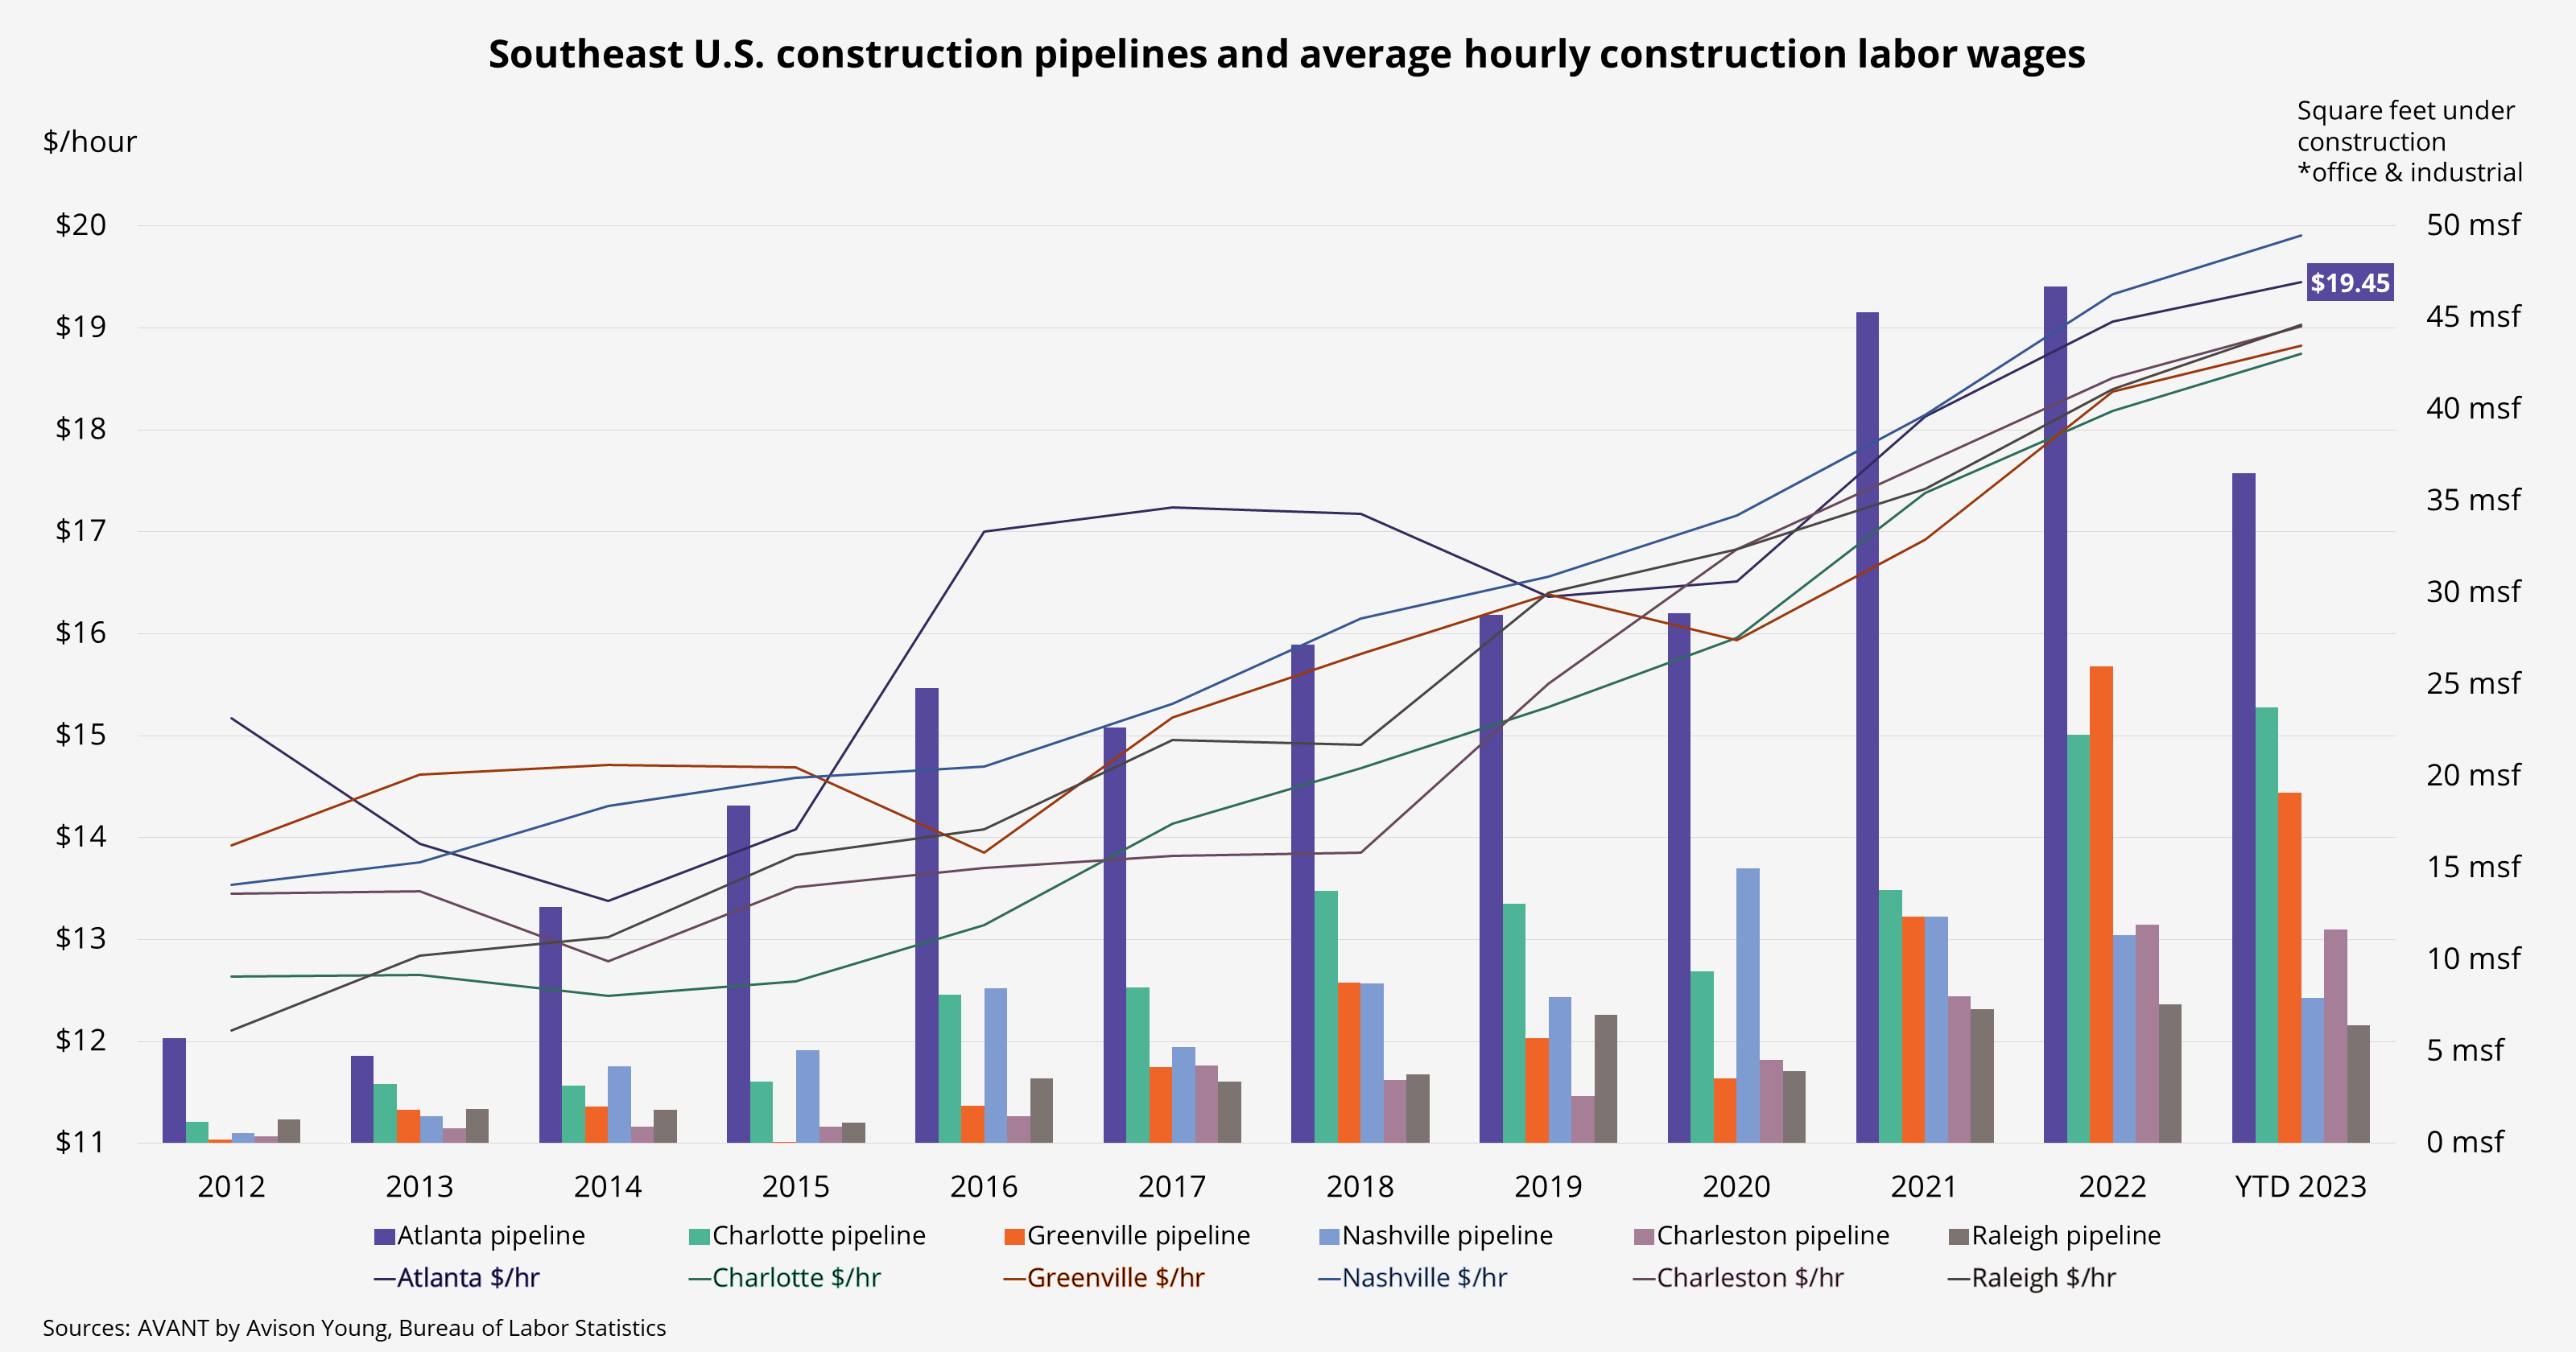 graph of Southeast U.S. cities construction pipelines and average hourly construction labor wages with Atlanta leading with the most square feet under construction since 2012